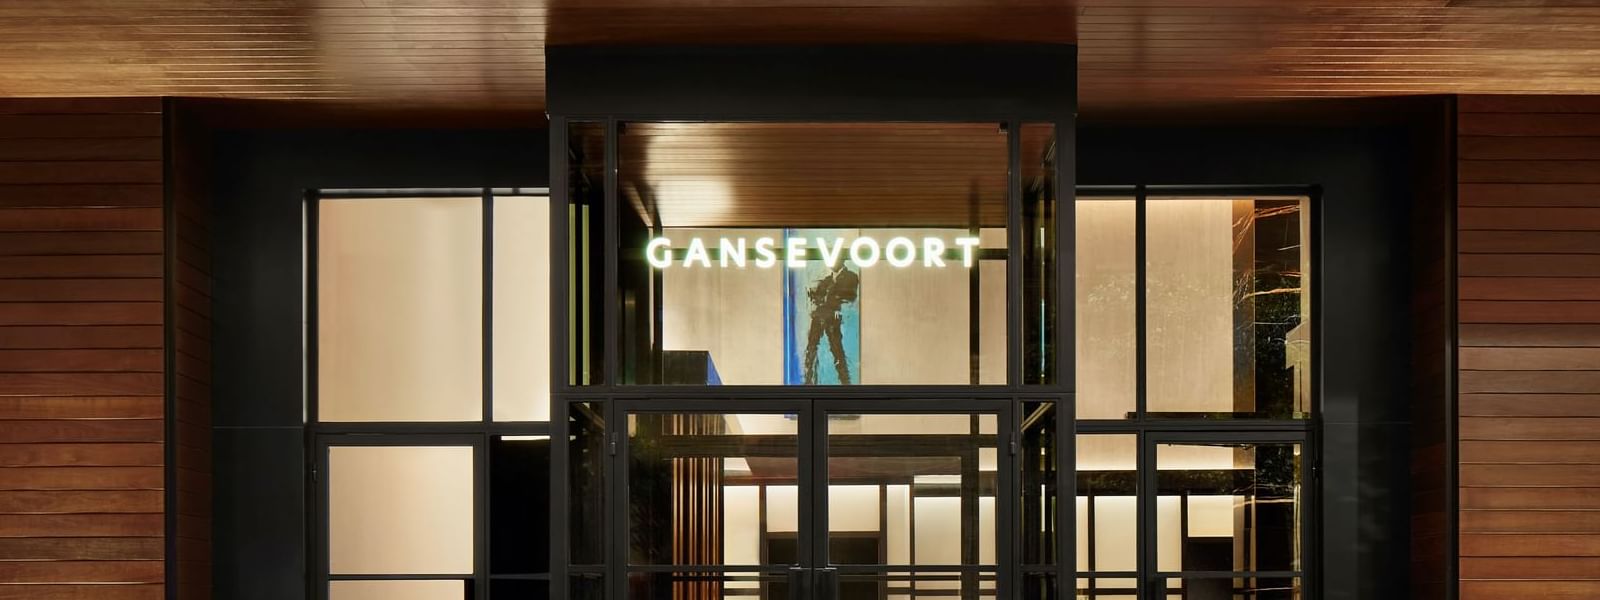 Gansevoort entrance exterior with sign and doors